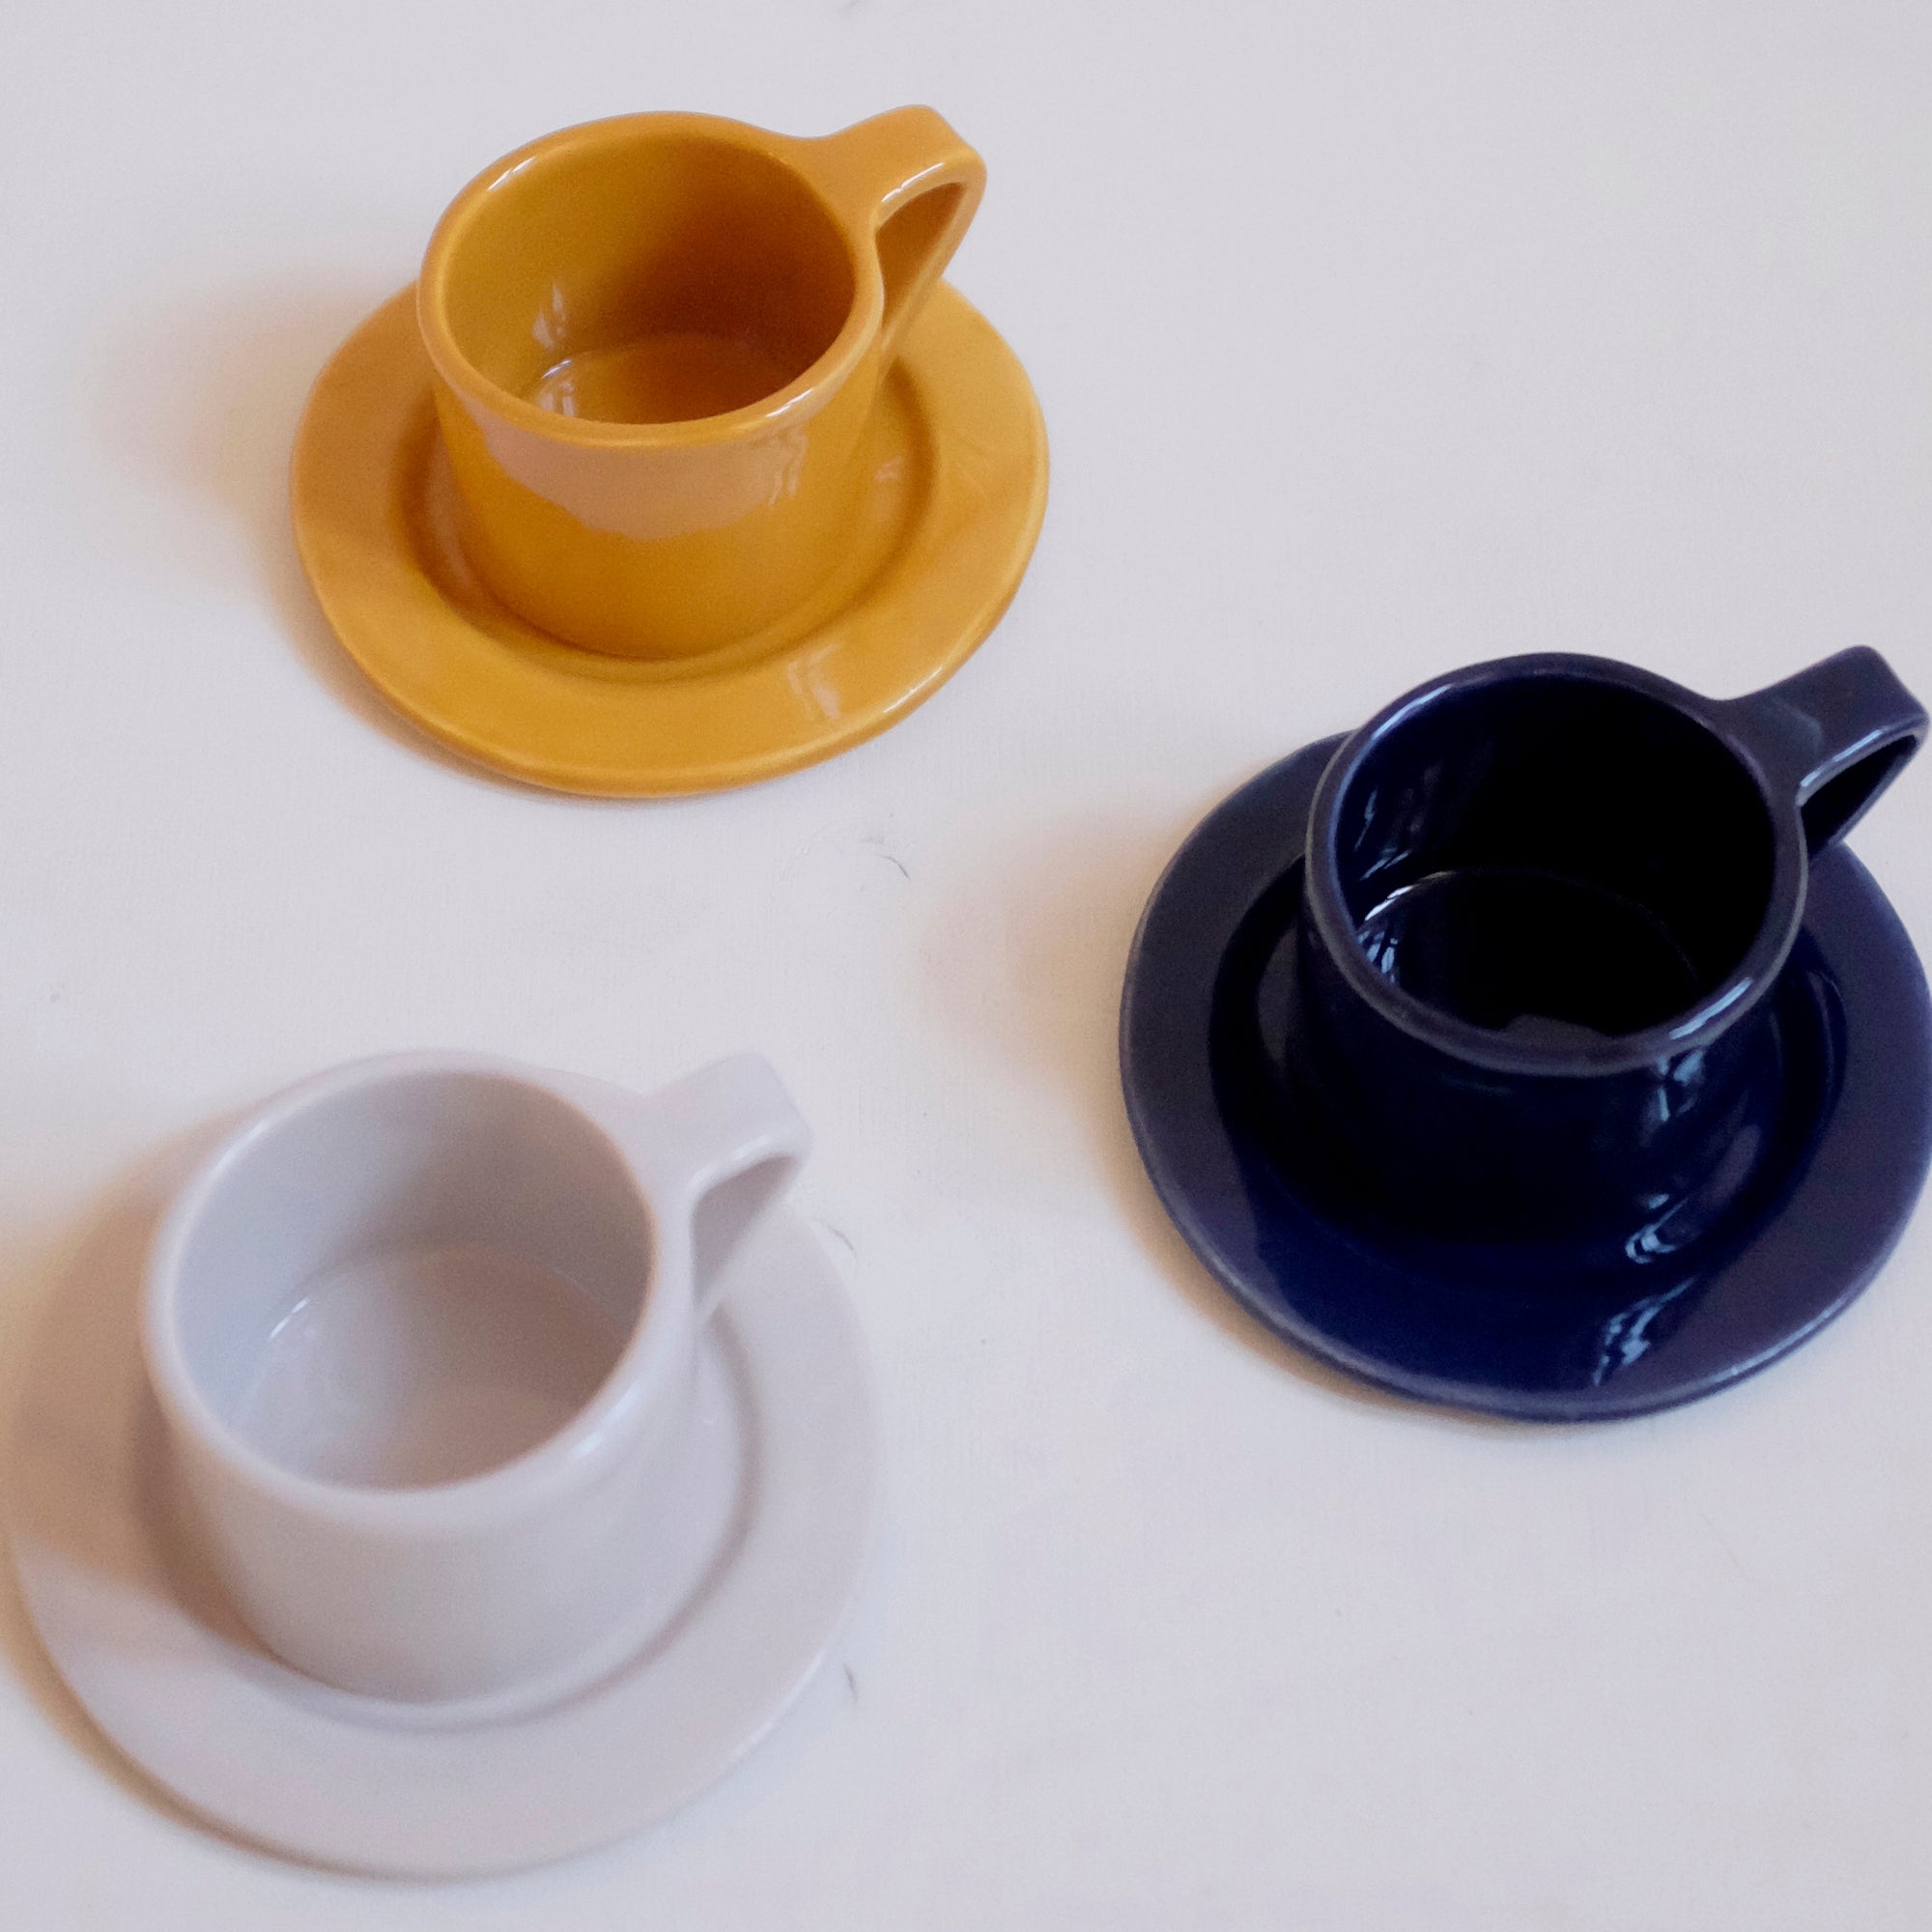 Milano Nebbia Set of 4 Espresso cups and saucers - Alternative view 2